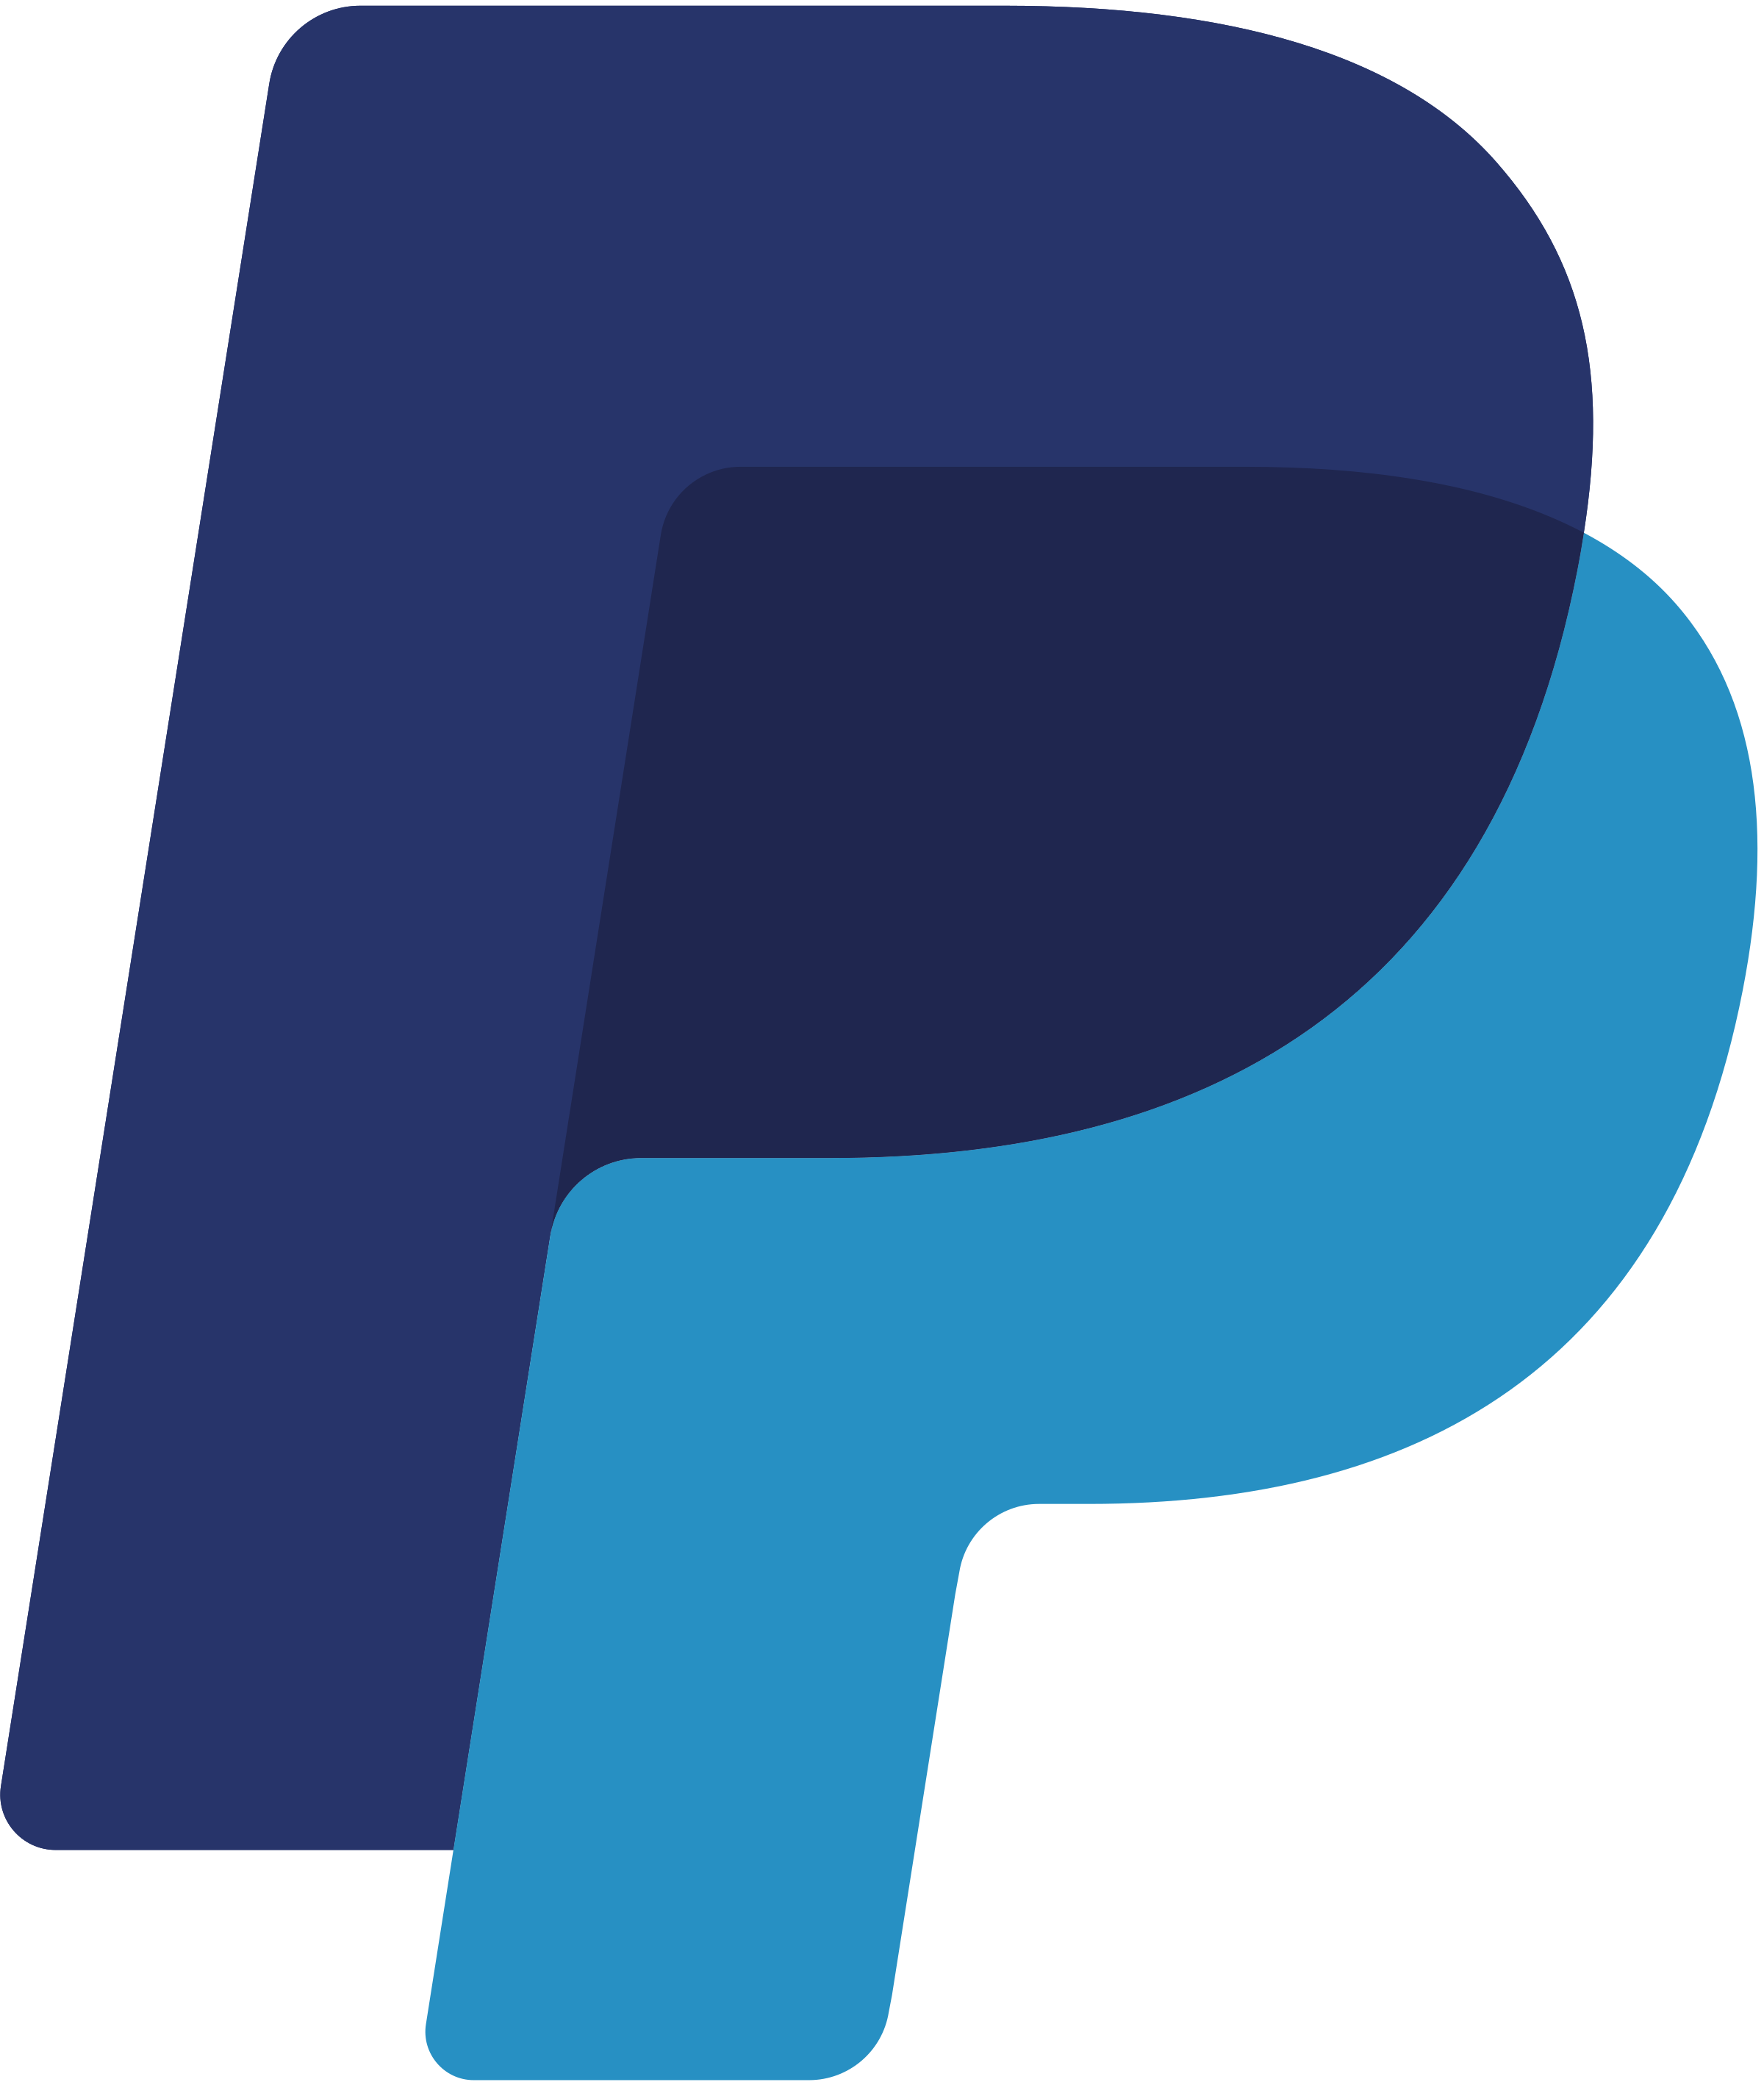 PayPal Logo PNG Transparent Images - PNG All